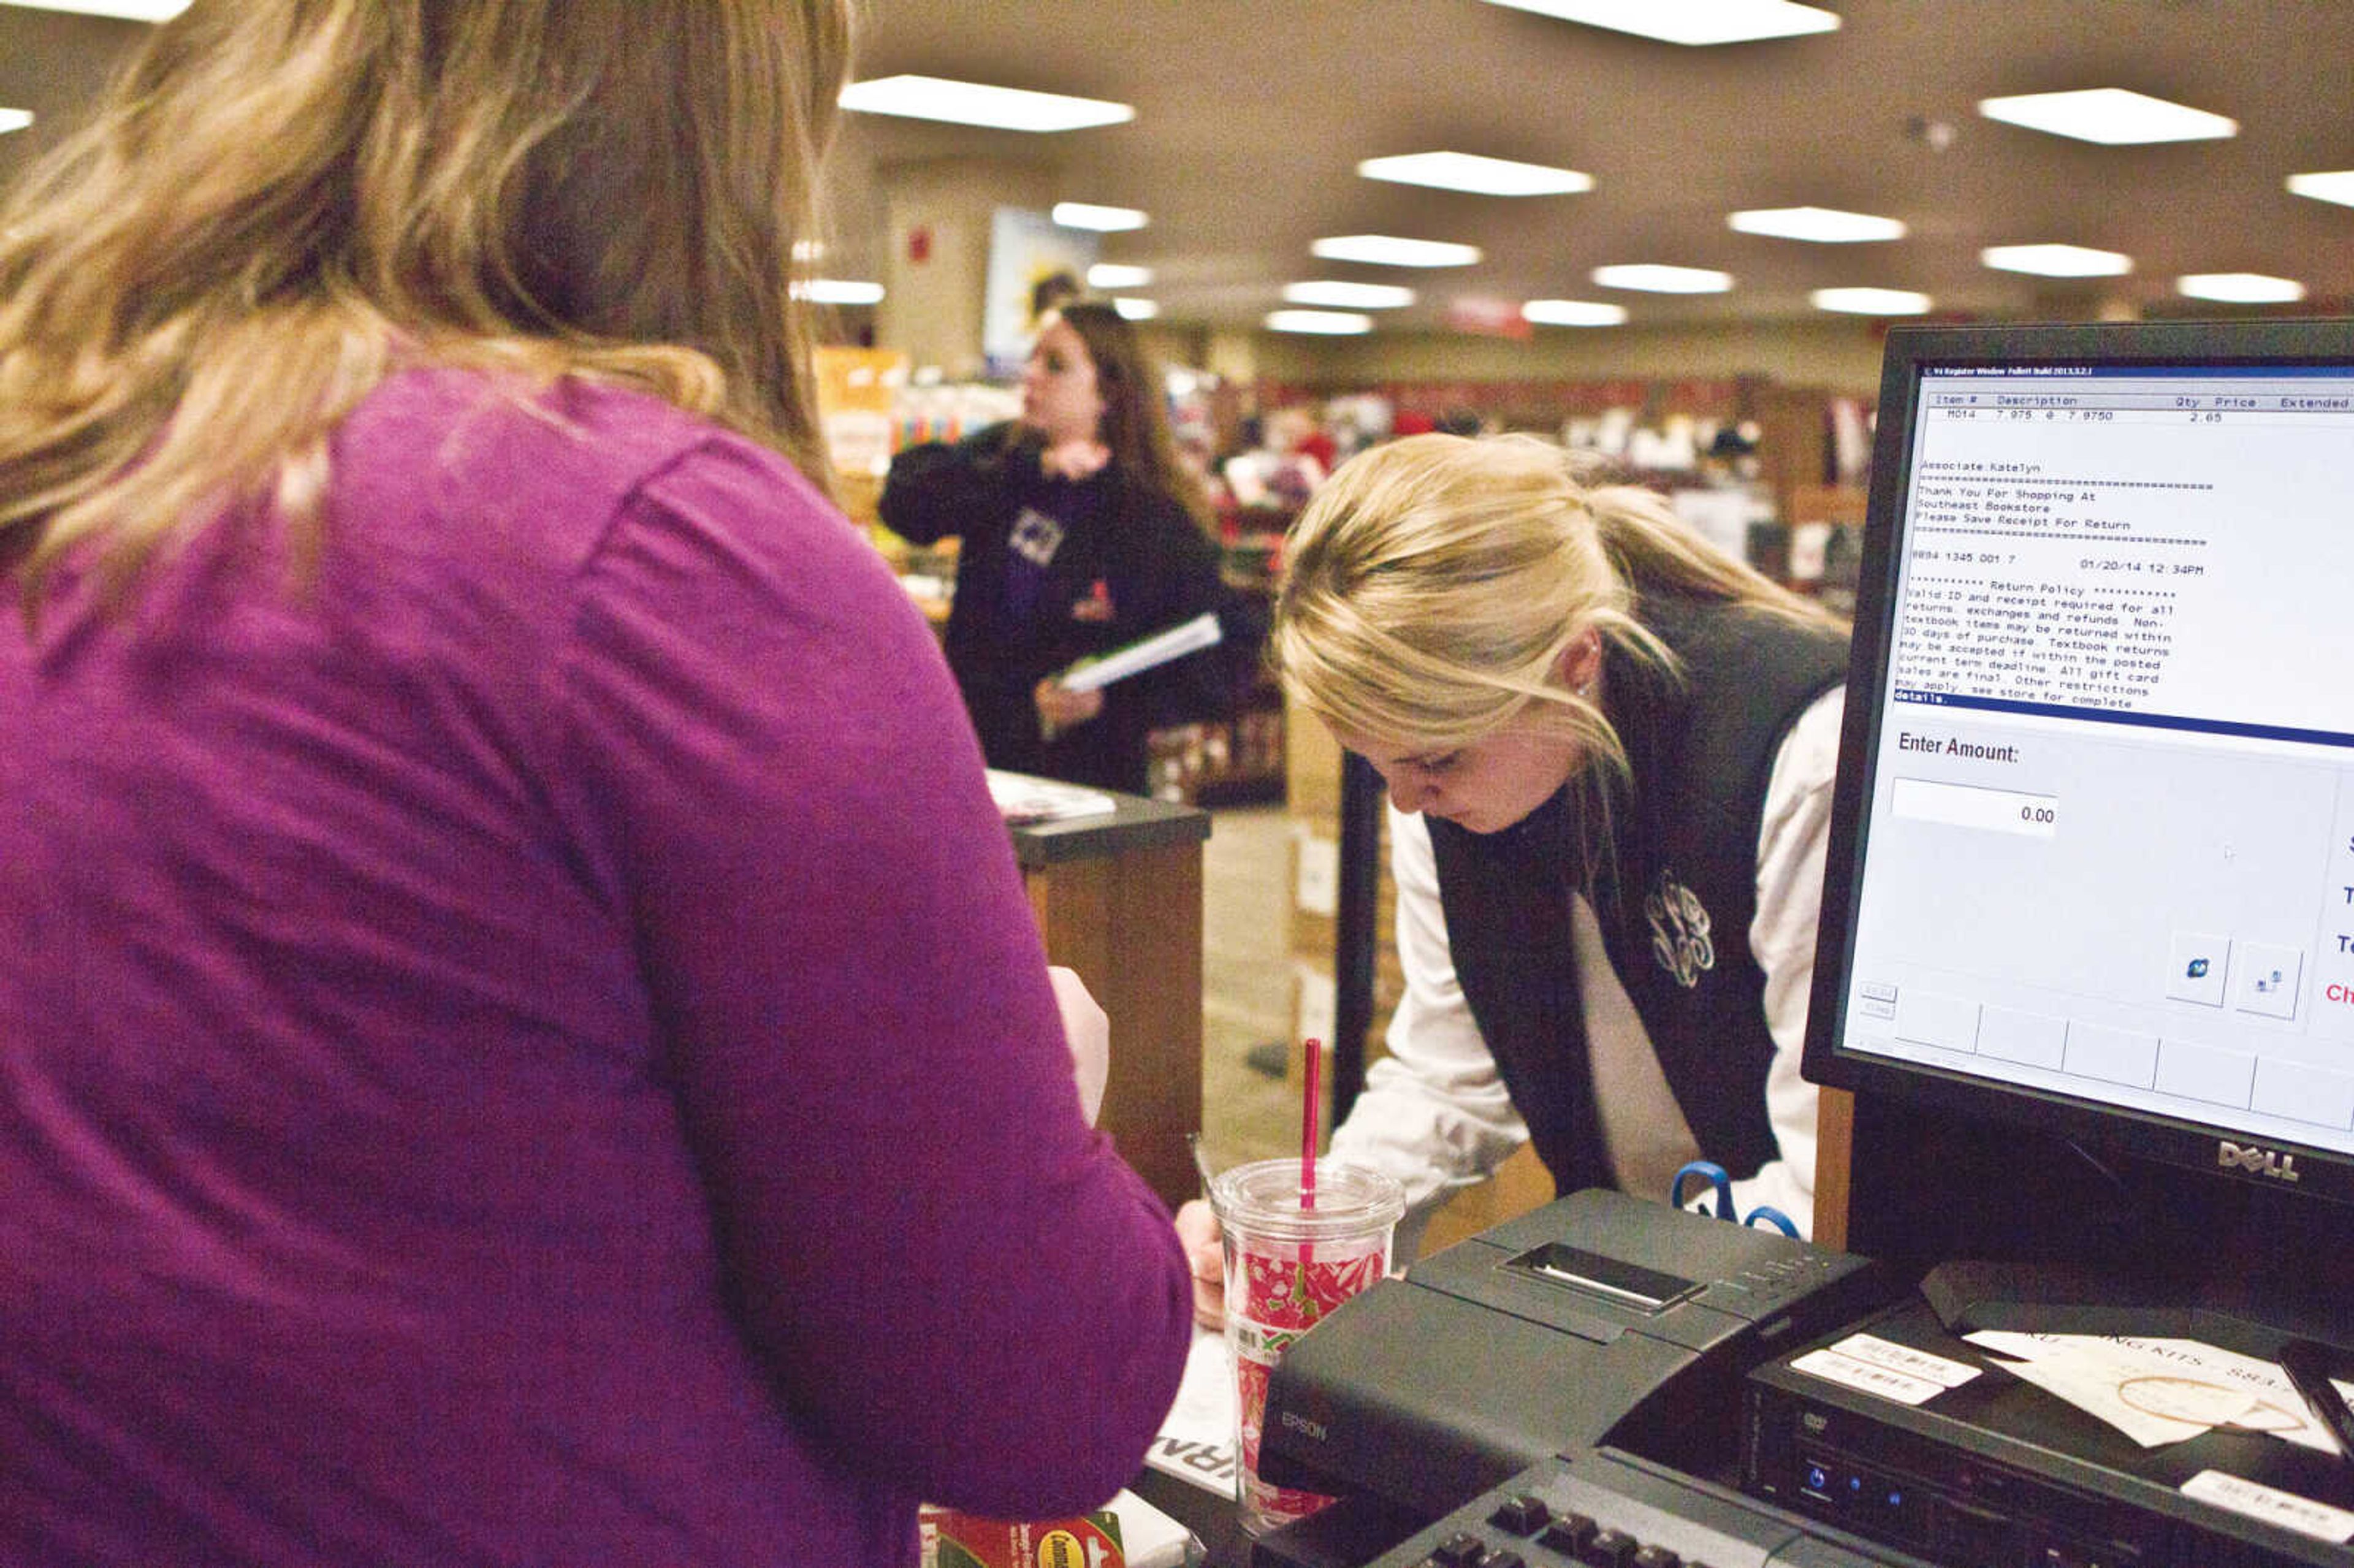 Bookstore confusion results in approximately 60 students being charged for textbook rentals